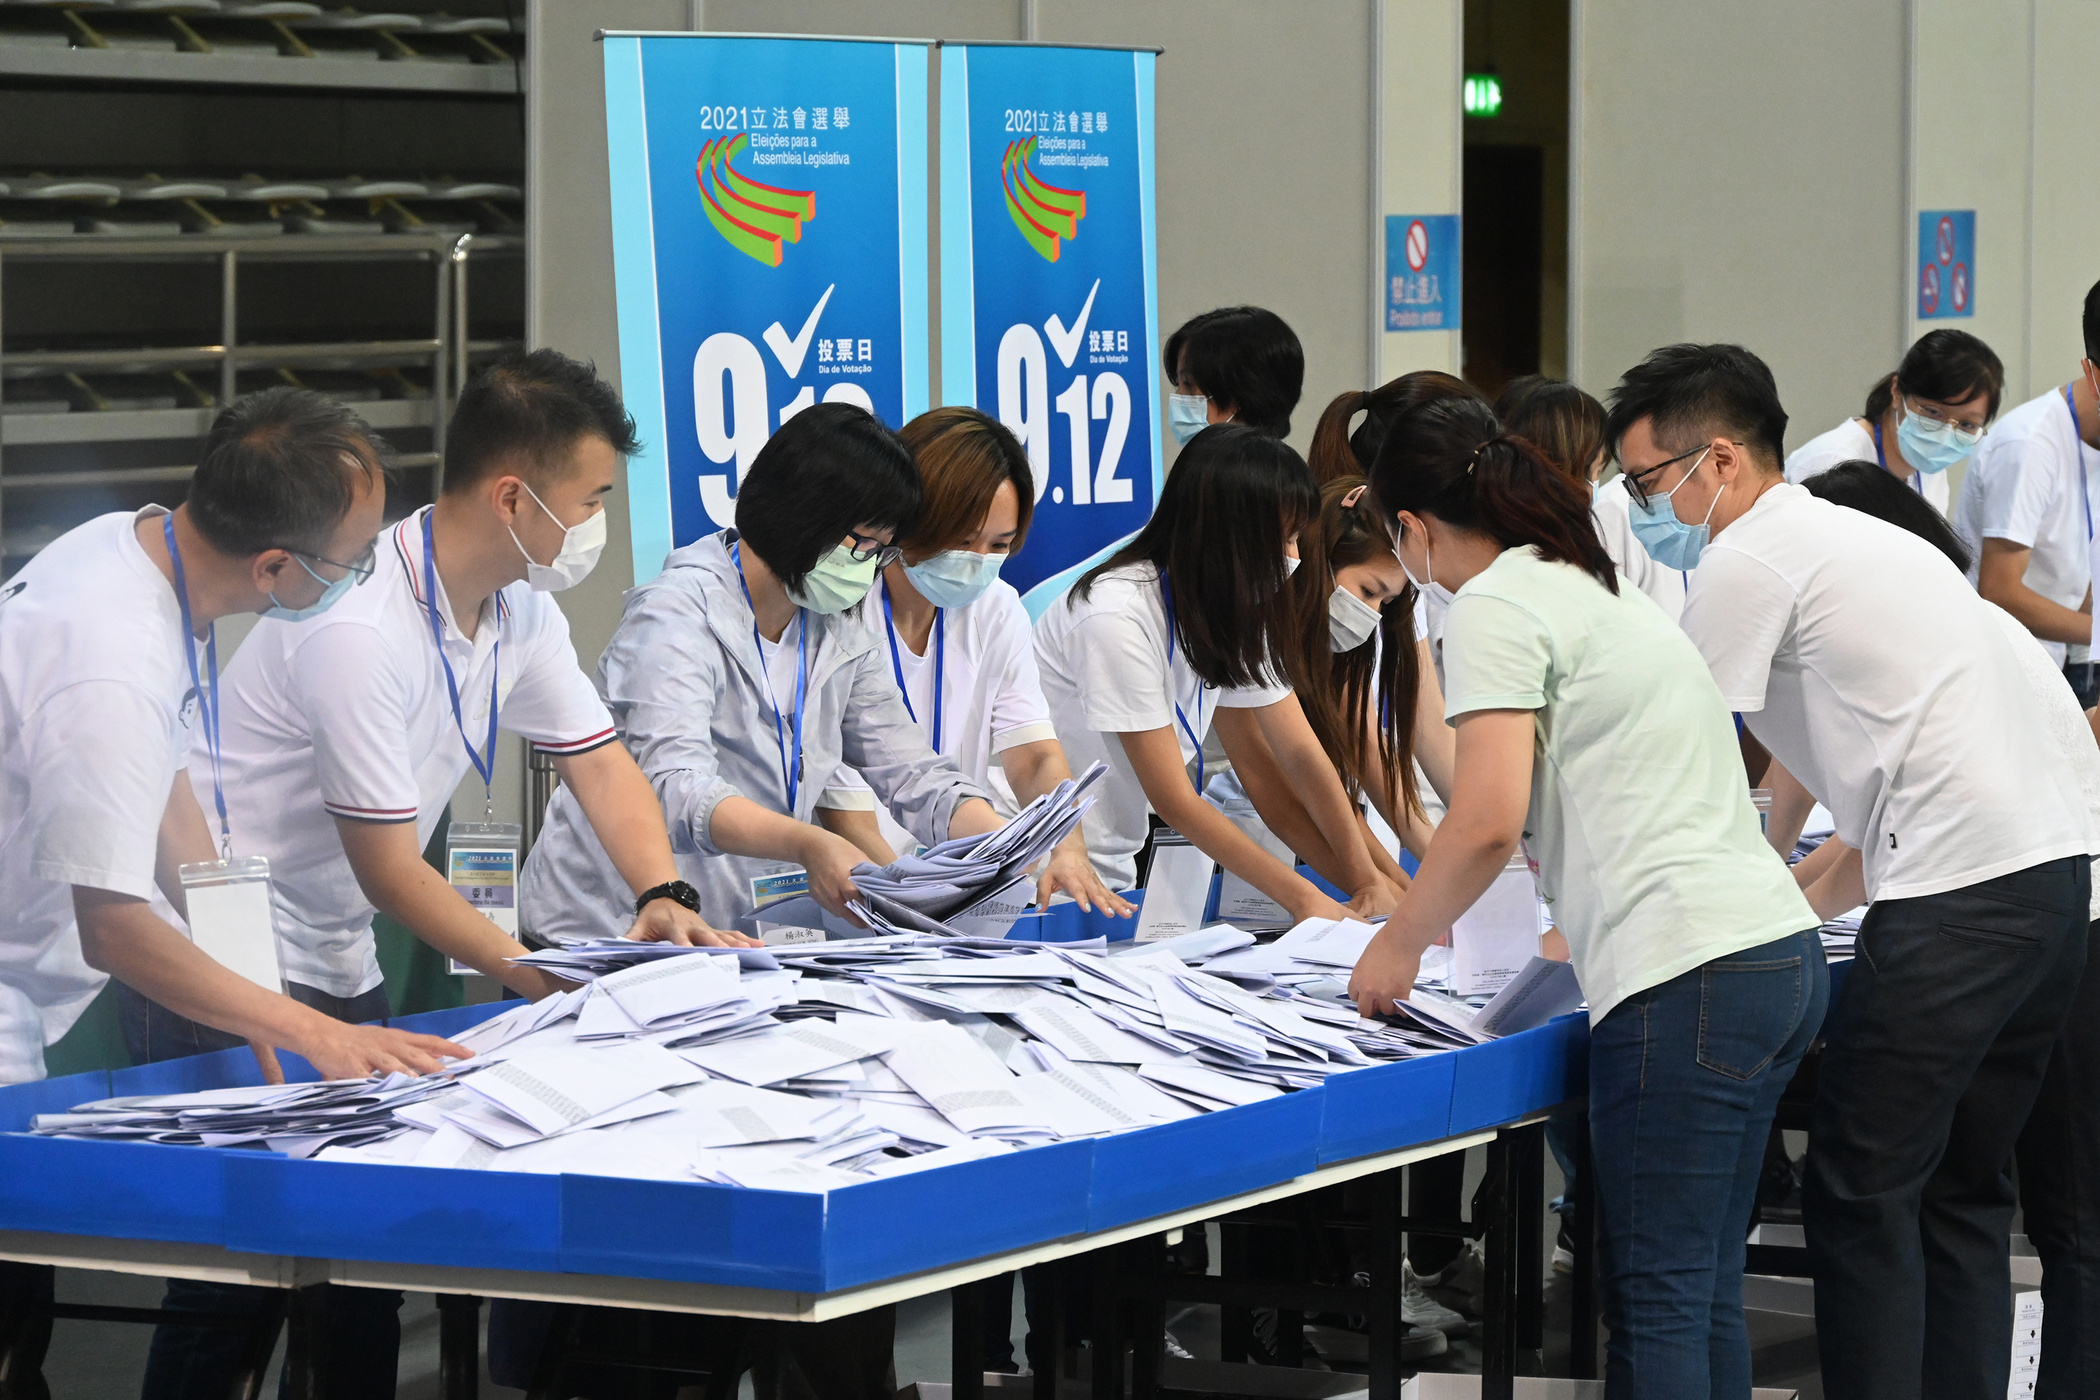 Polling staff opened ballot boxes to begin tallying the results of the Seventh Legislative Assembly